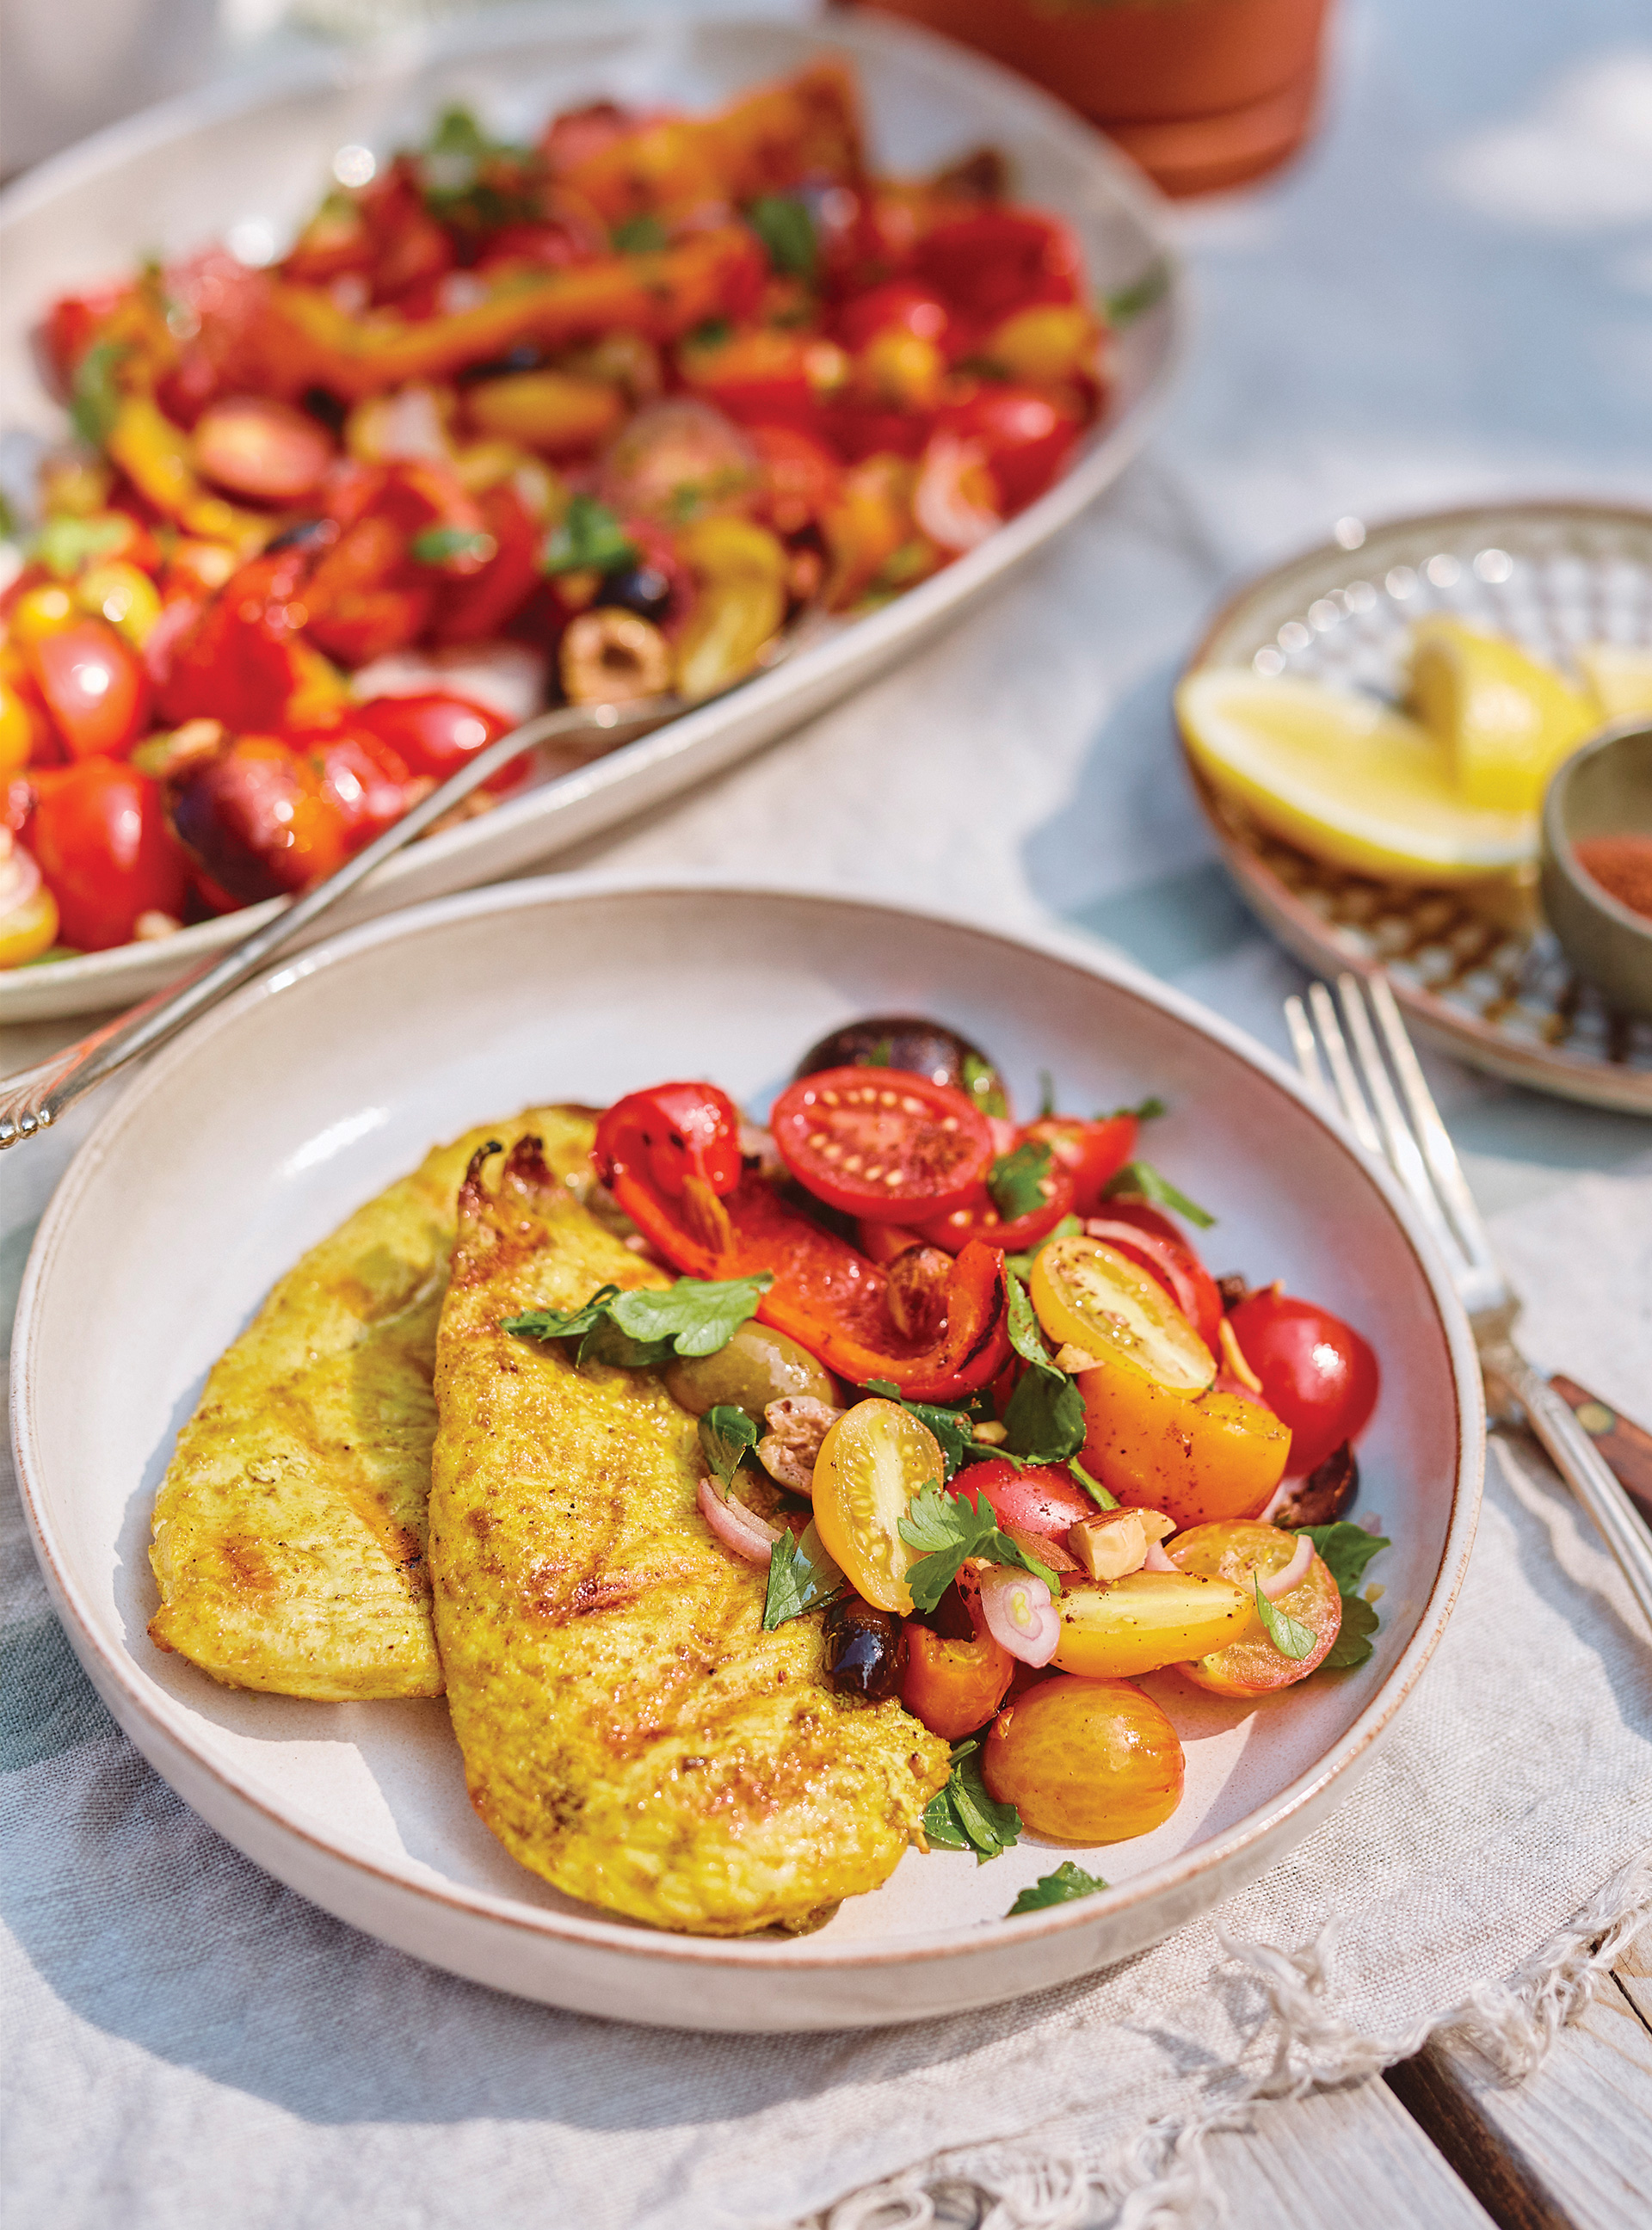 Grilled Chicken with Tomato, Grilled Pepper and Olive Salad